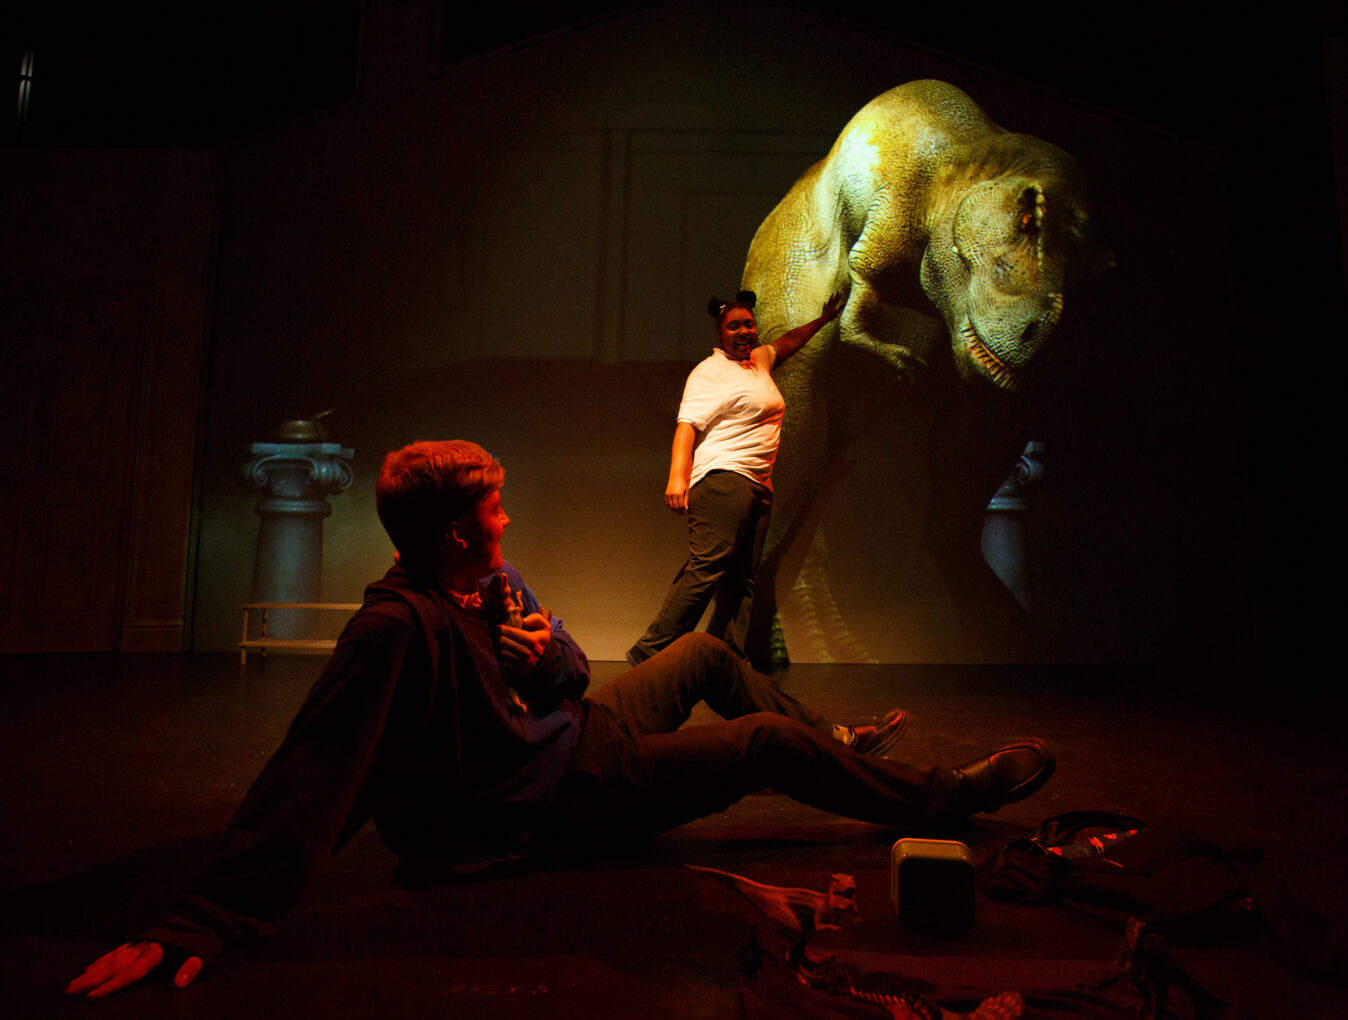 Two actors playing school children face a big projection of a T Rex. One of the actors touches the dinosaur, while the other cowers on the floor.